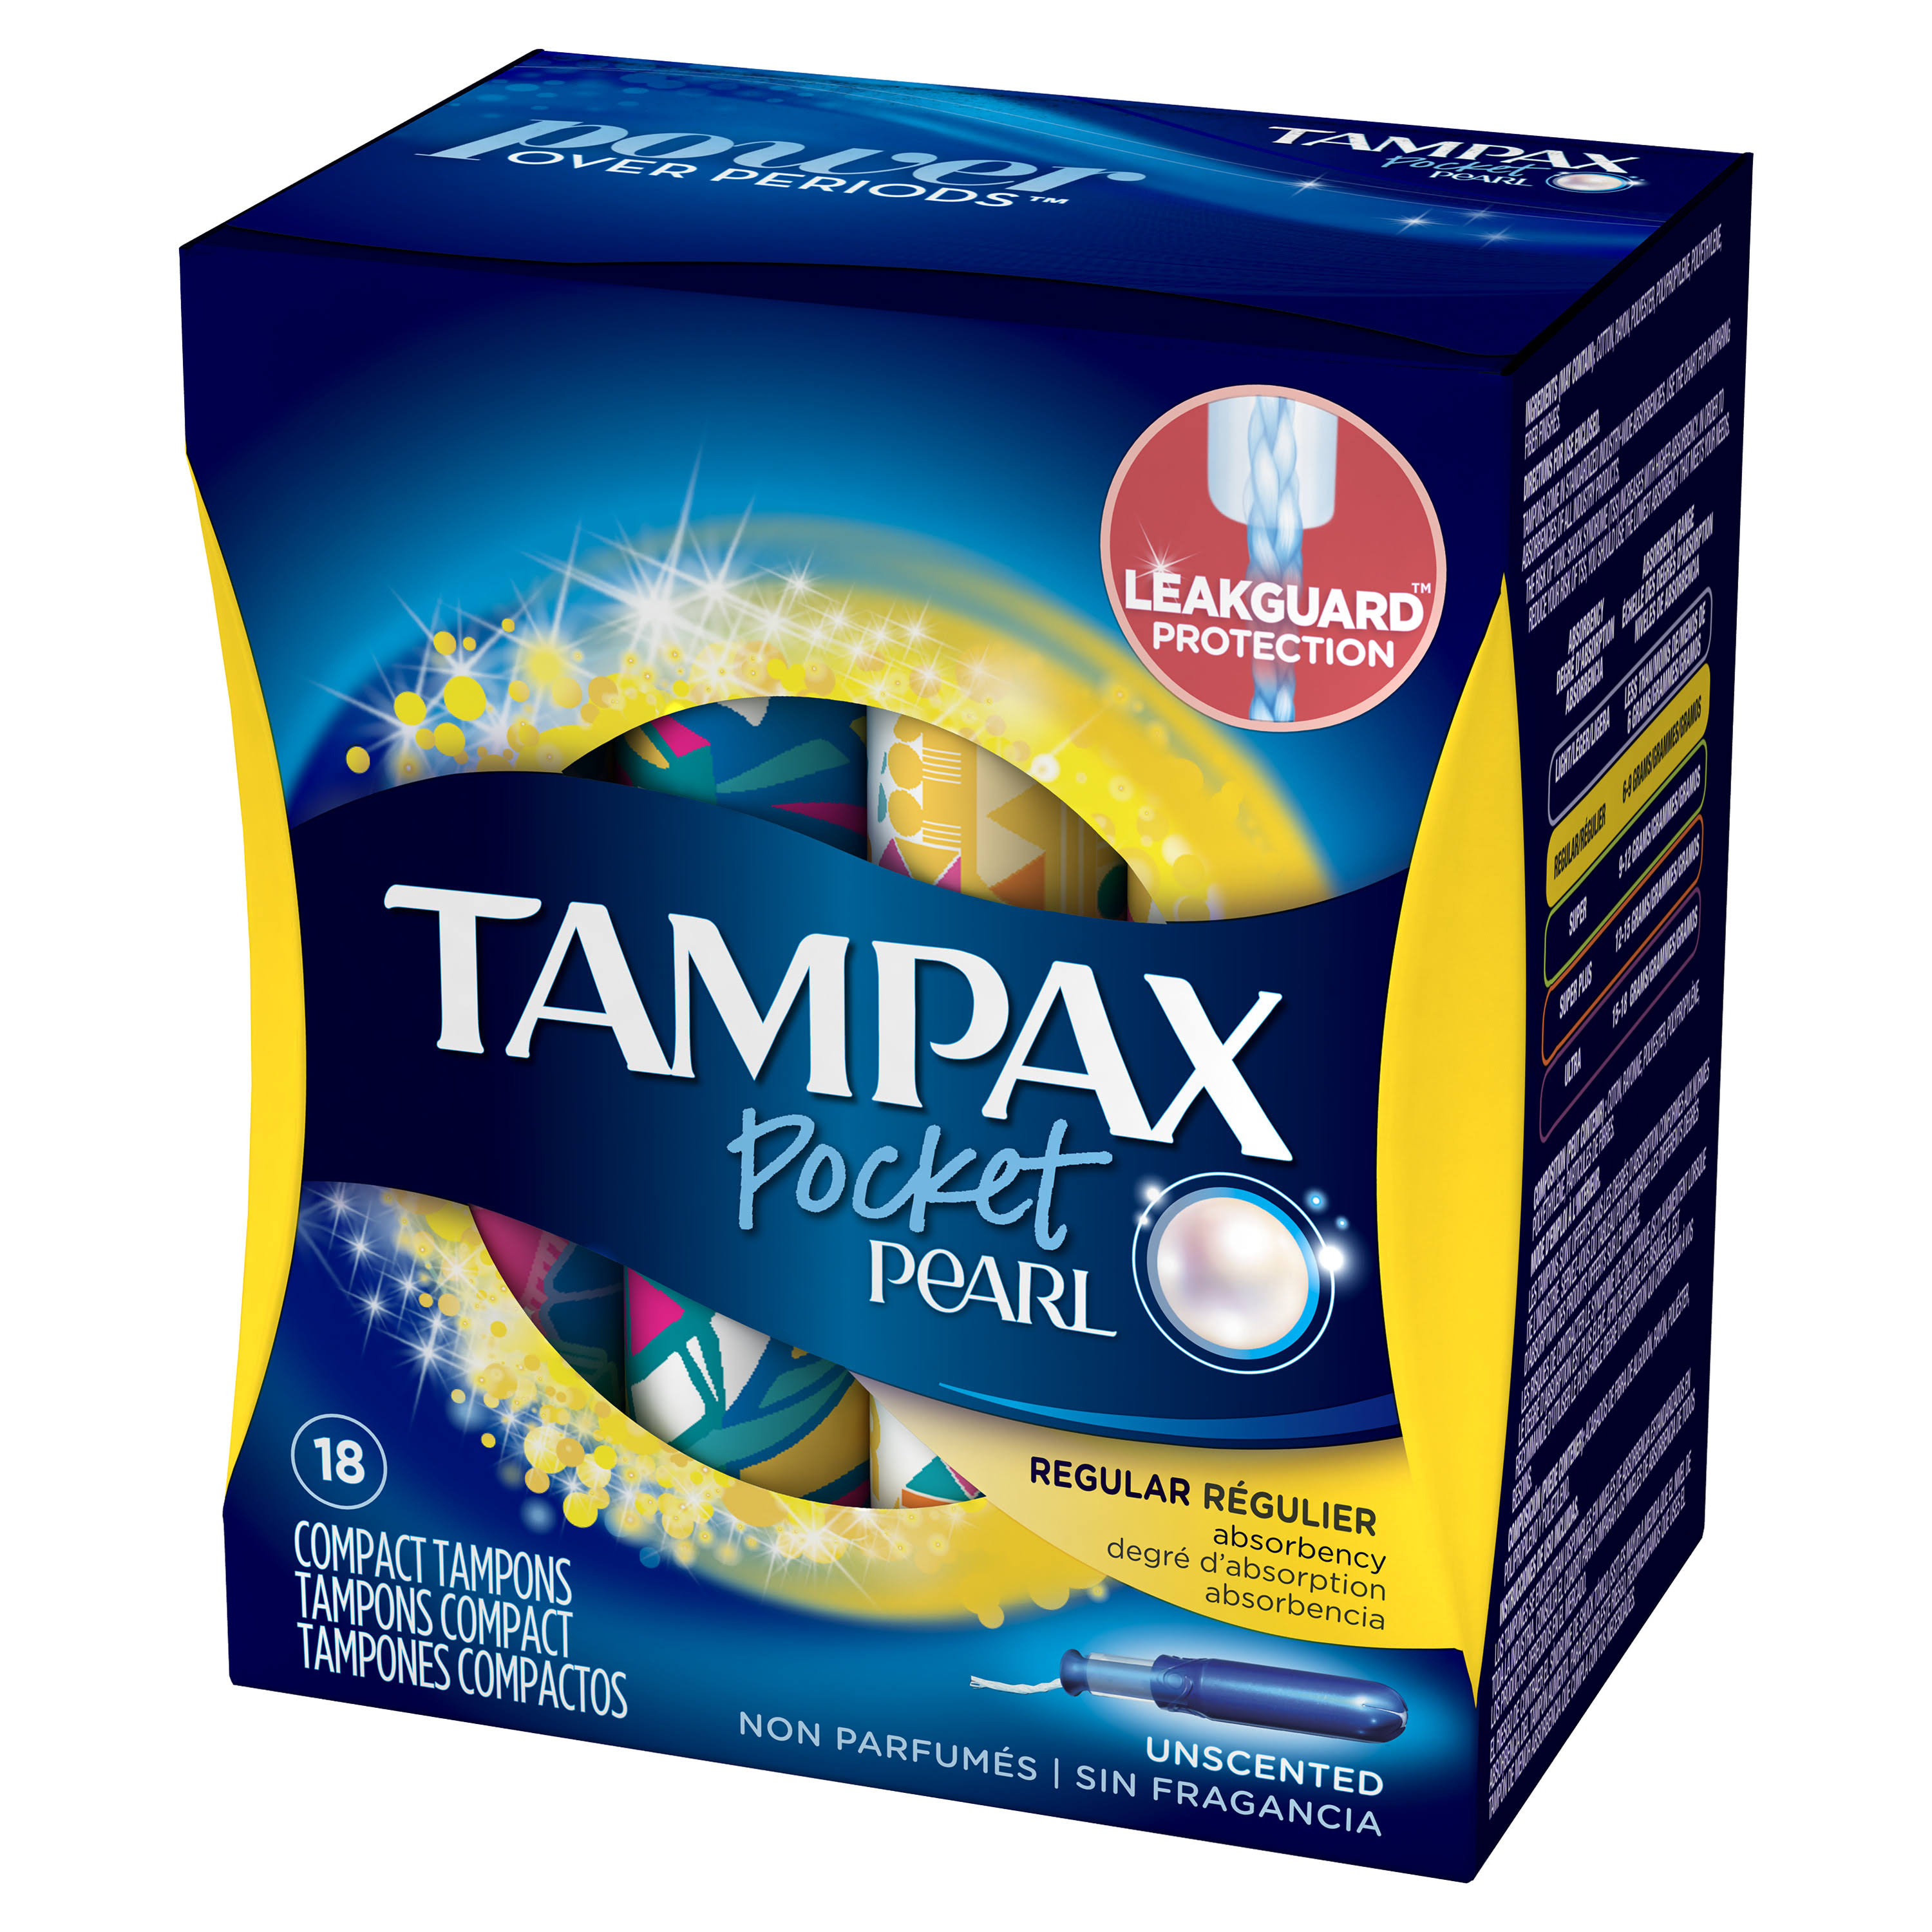 Tampax Pocket Pearl Regular Absorbency Unscented Compact Tampons